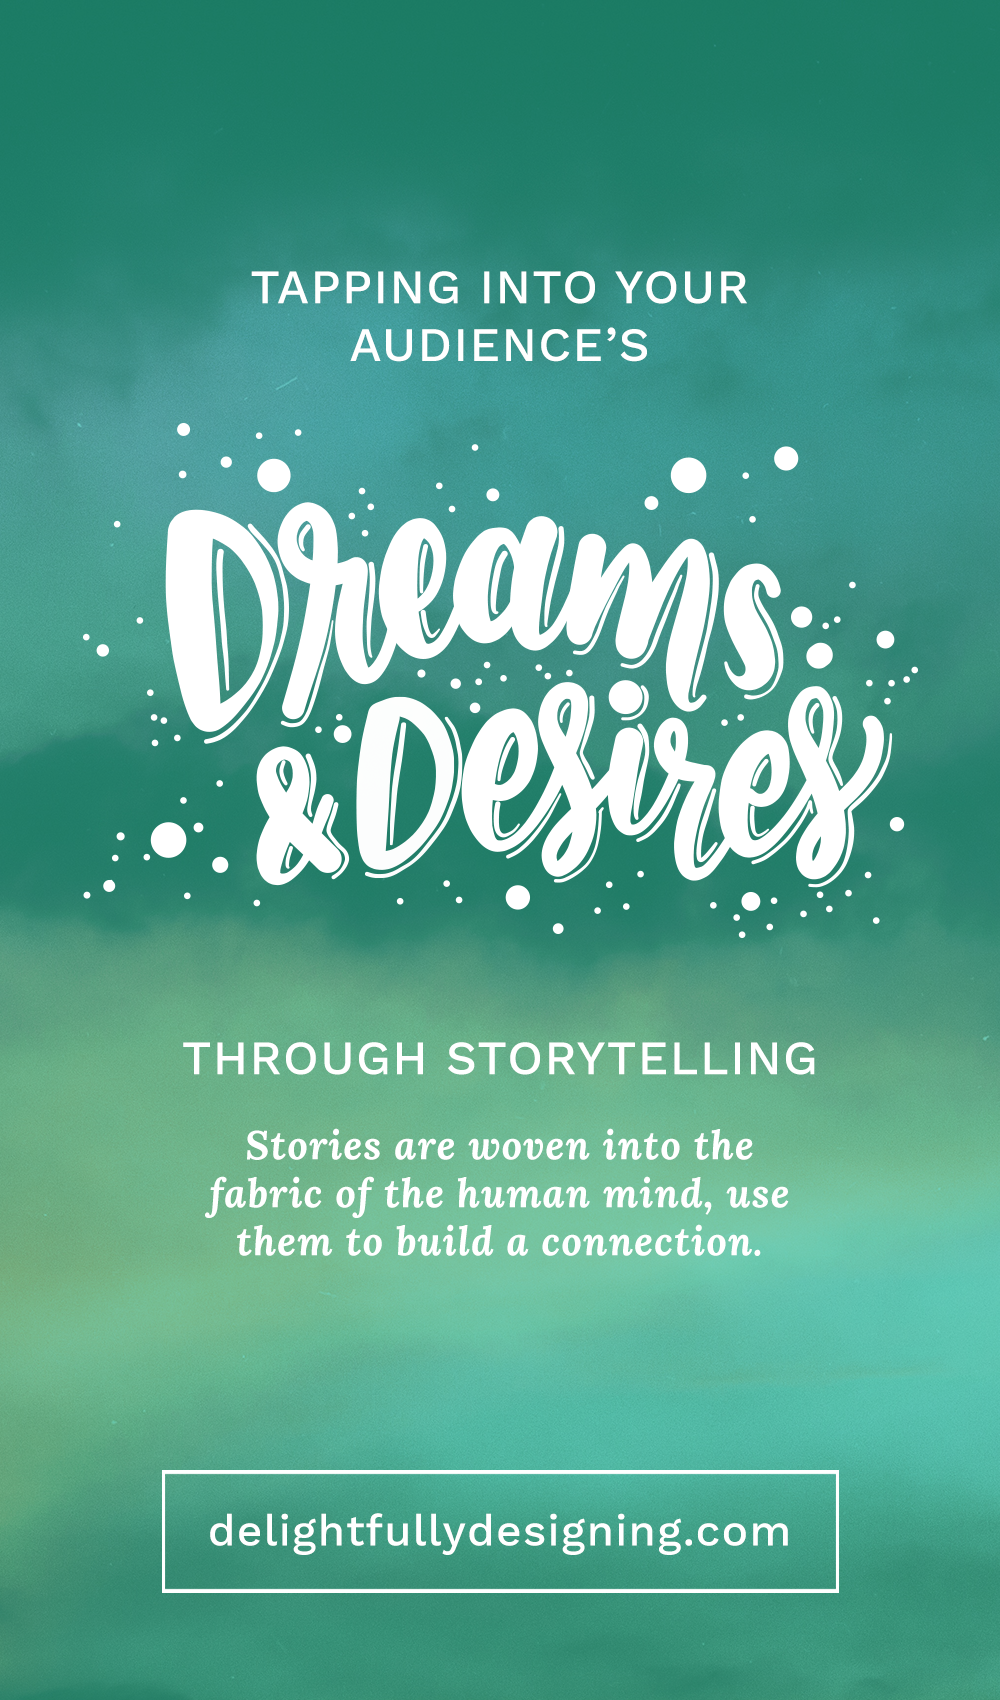 Teal sky image with hand lettered overlay that reads: Tapping into your Audience's Dreams & Desires through storytelling